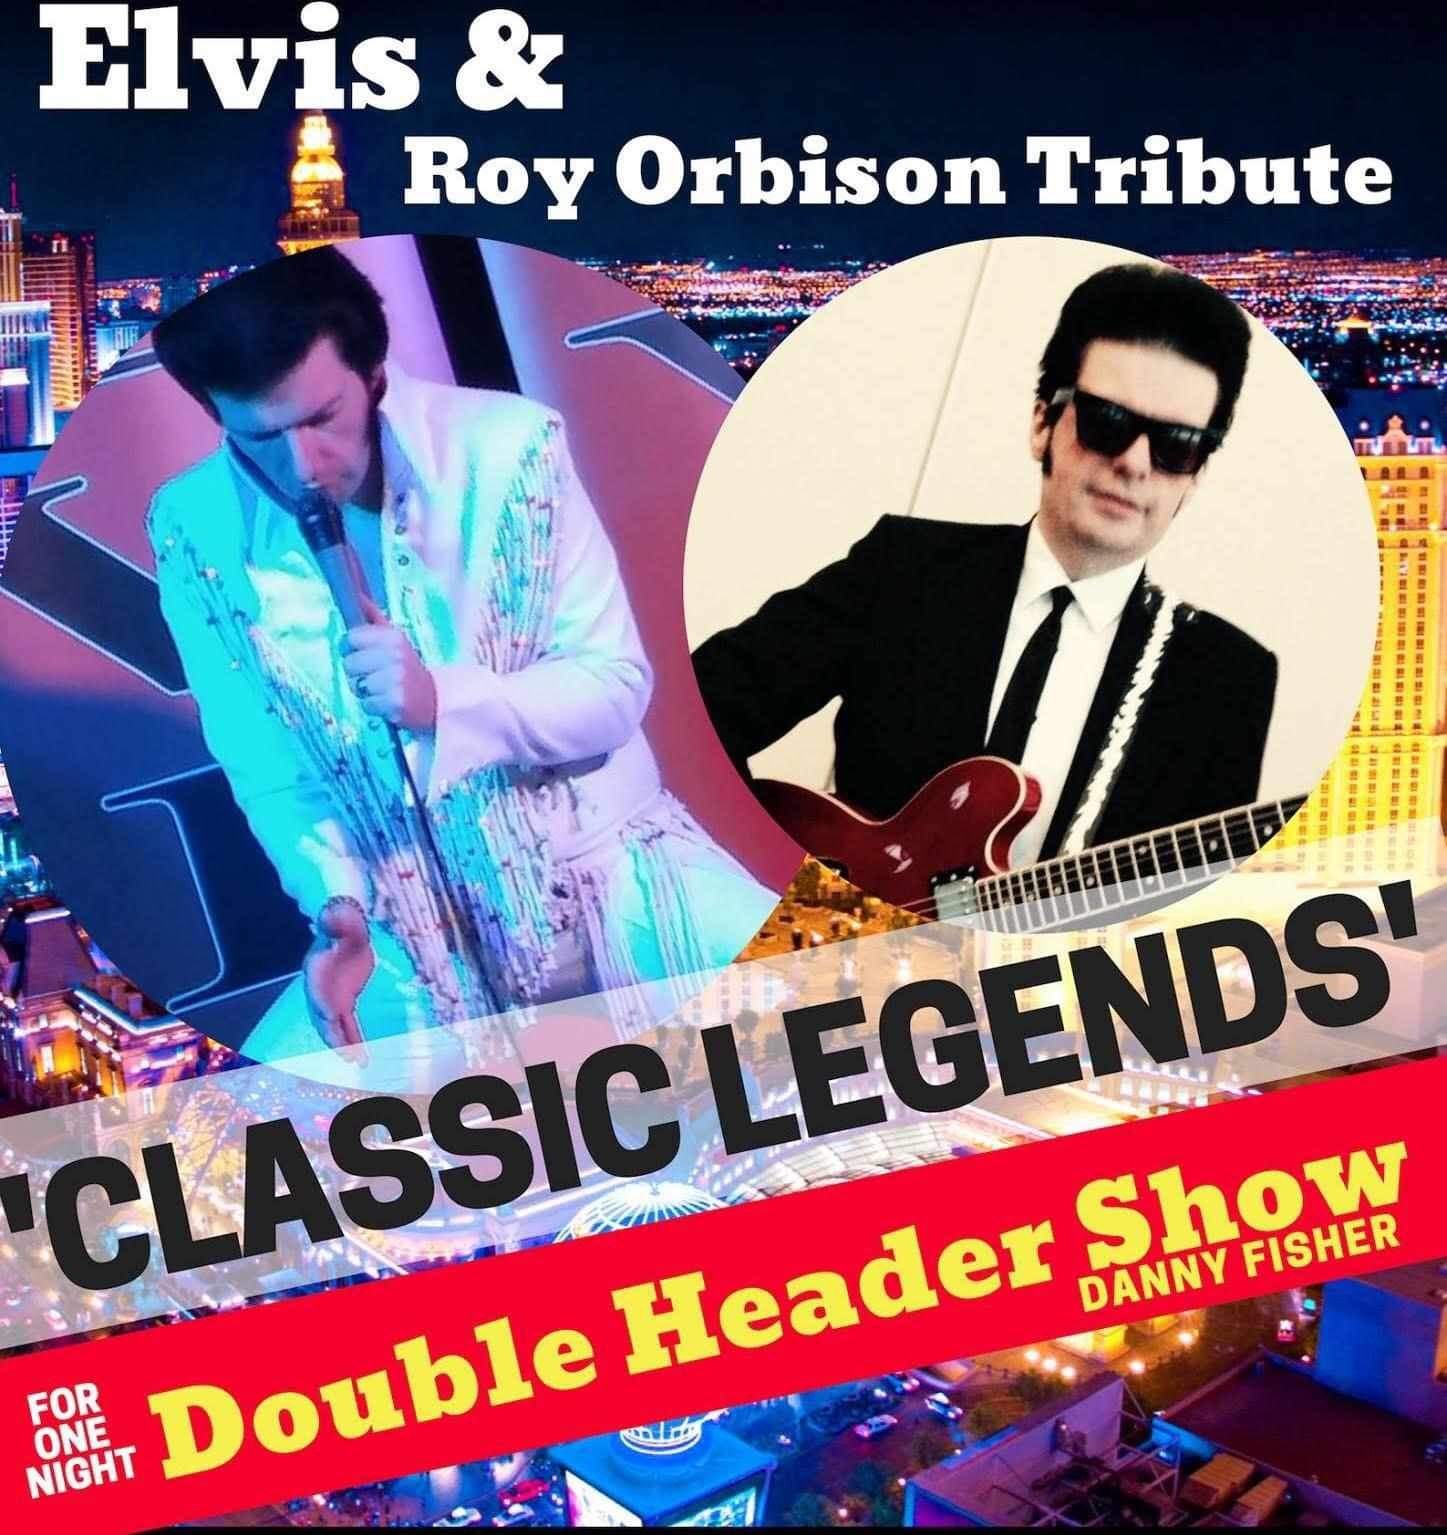 Elvis and Roy Orbison Tribute  on Dec 15, 19:30@Leverington Sports and Social Club - Buy tickets and Get information on whittlesey music nights 